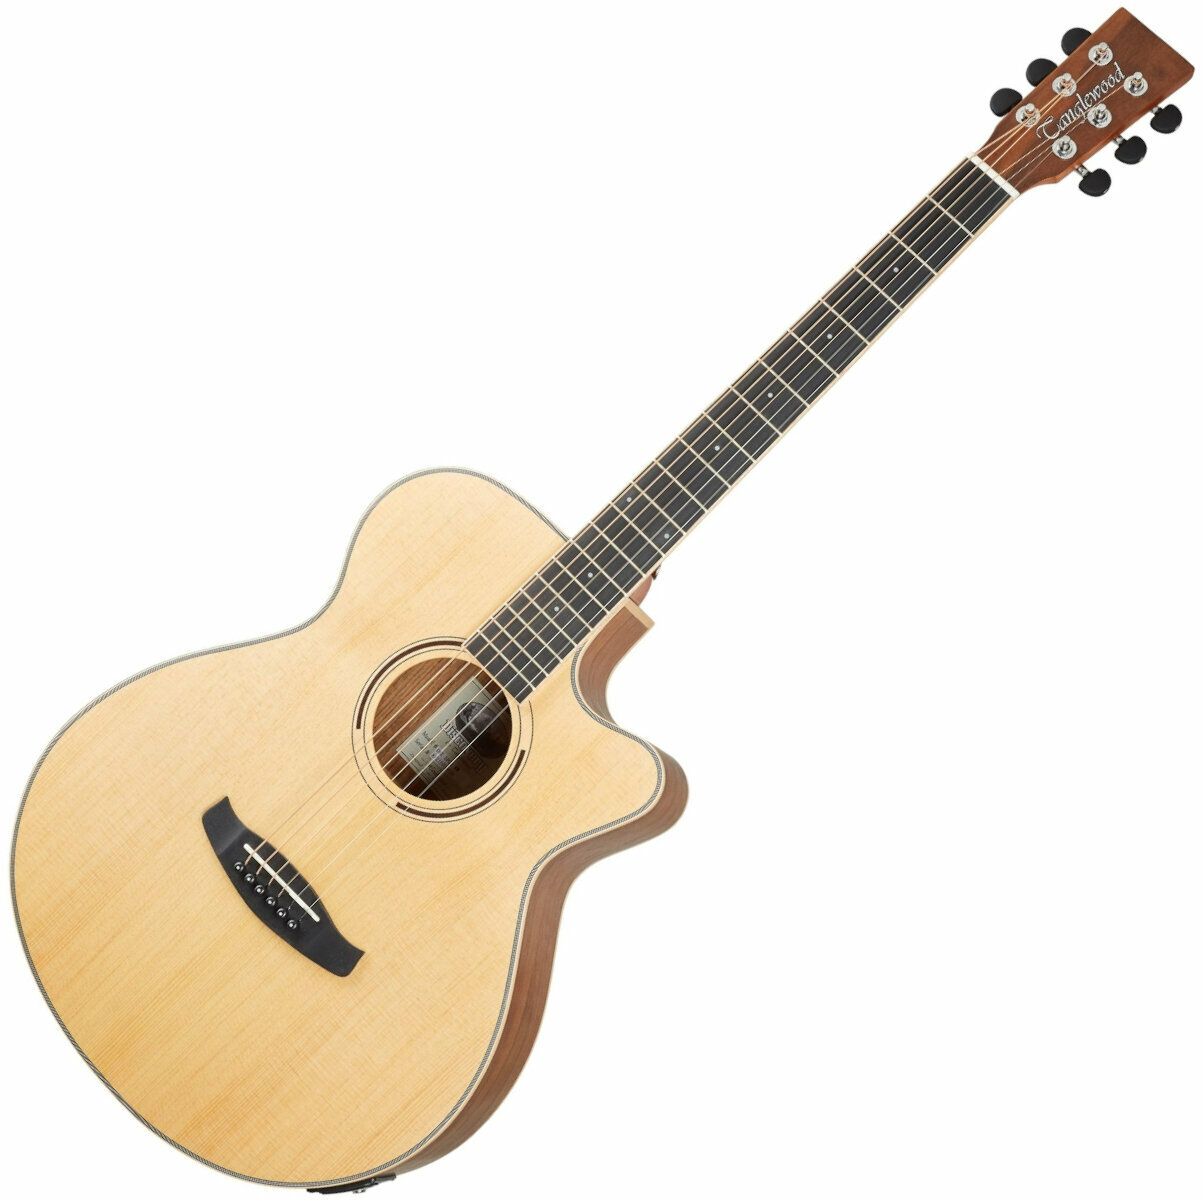 Electro-acoustic guitar Tanglewood DBT SFCE BW Natural Satin